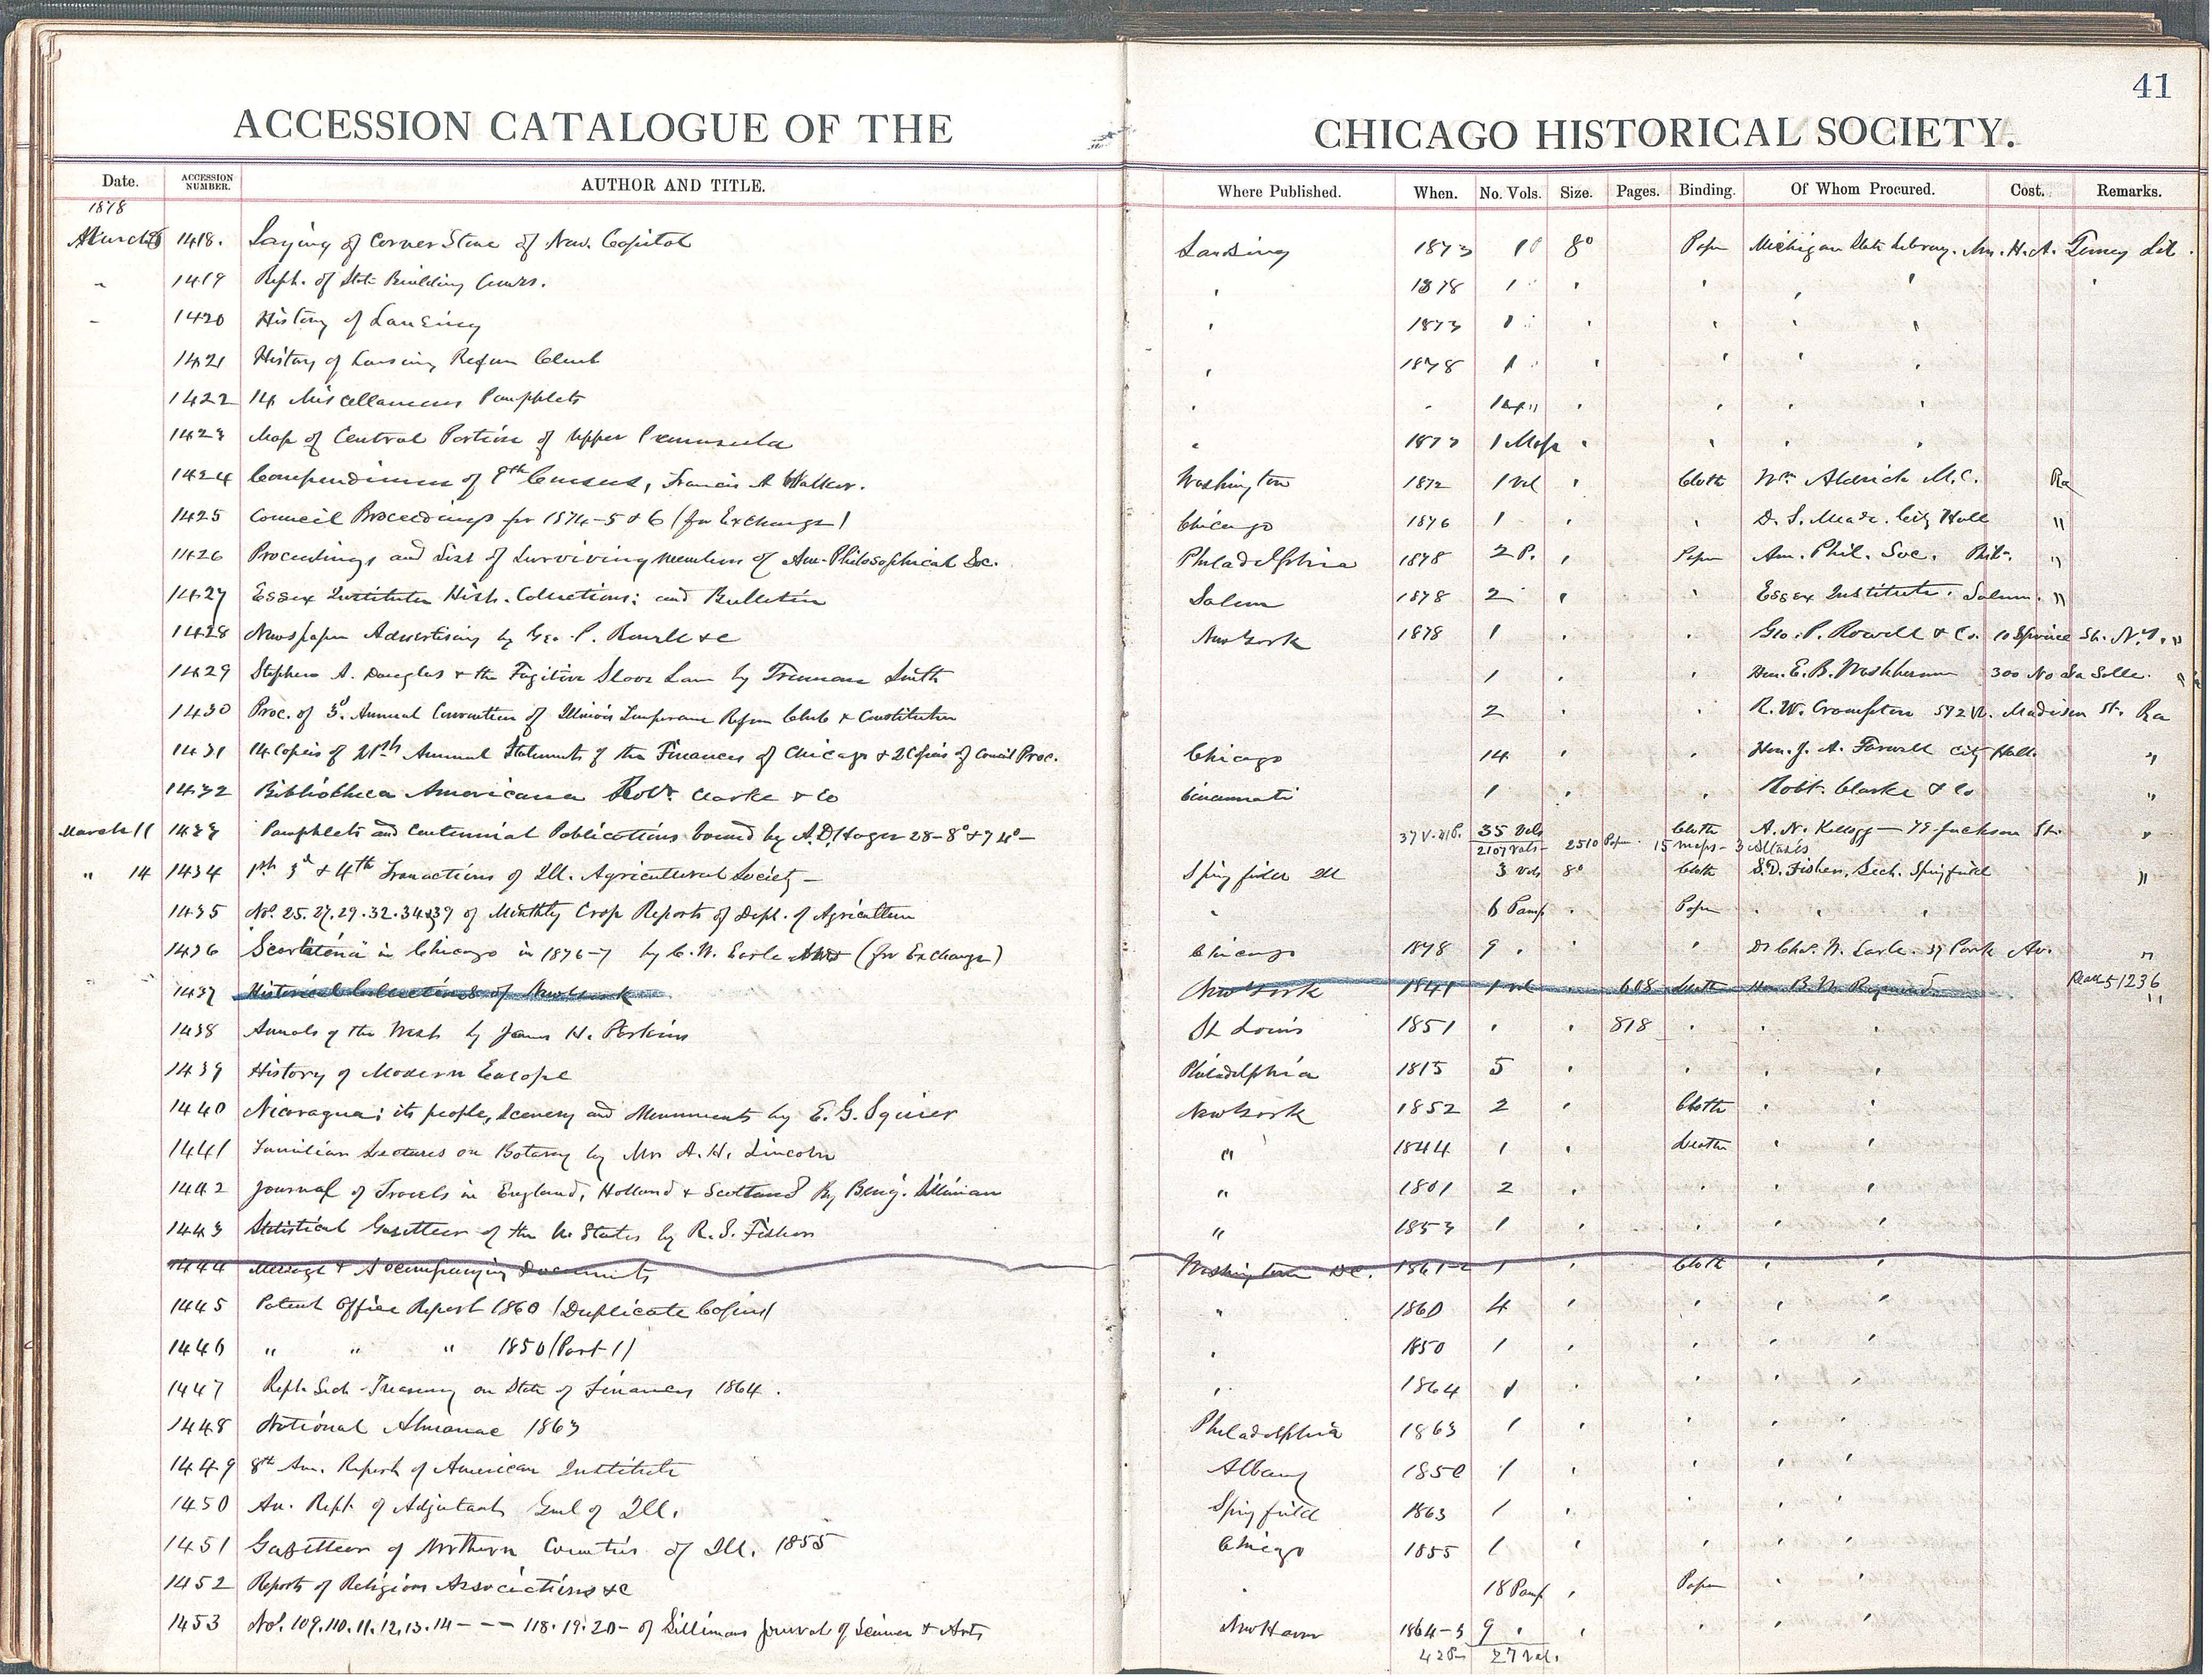 Chicago Historical Society Accession Ledger for March 11, 1878